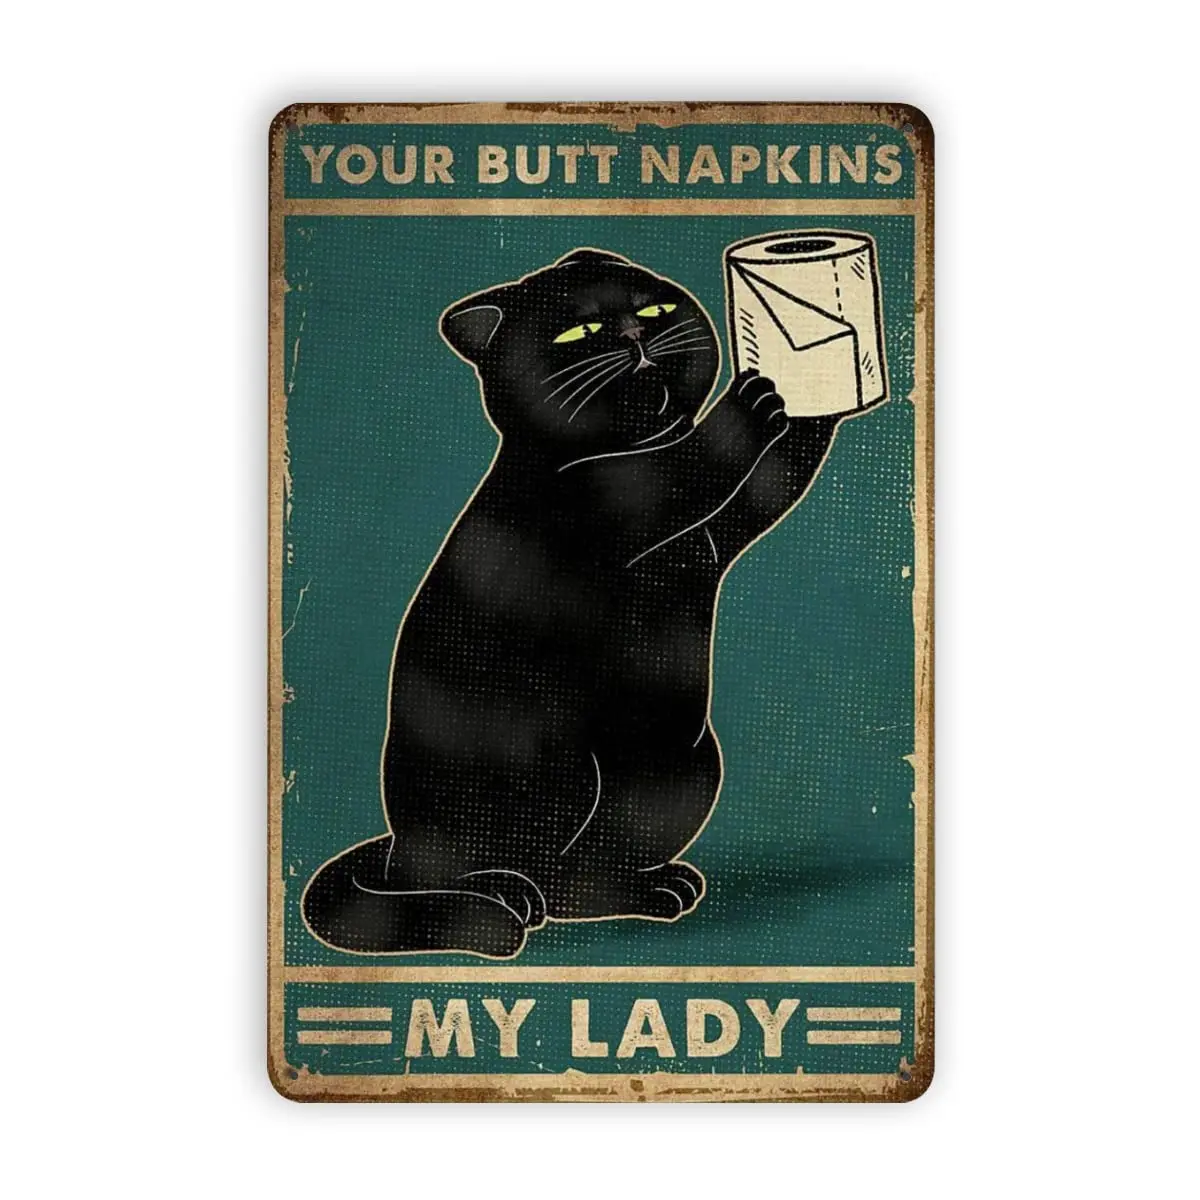 

Black Cat With Toilet Paper Your Butt Napkins My Lady Satin Portrait Poster Metal Retro Vintage Tin Sign Bar Wall Decor Poster 4